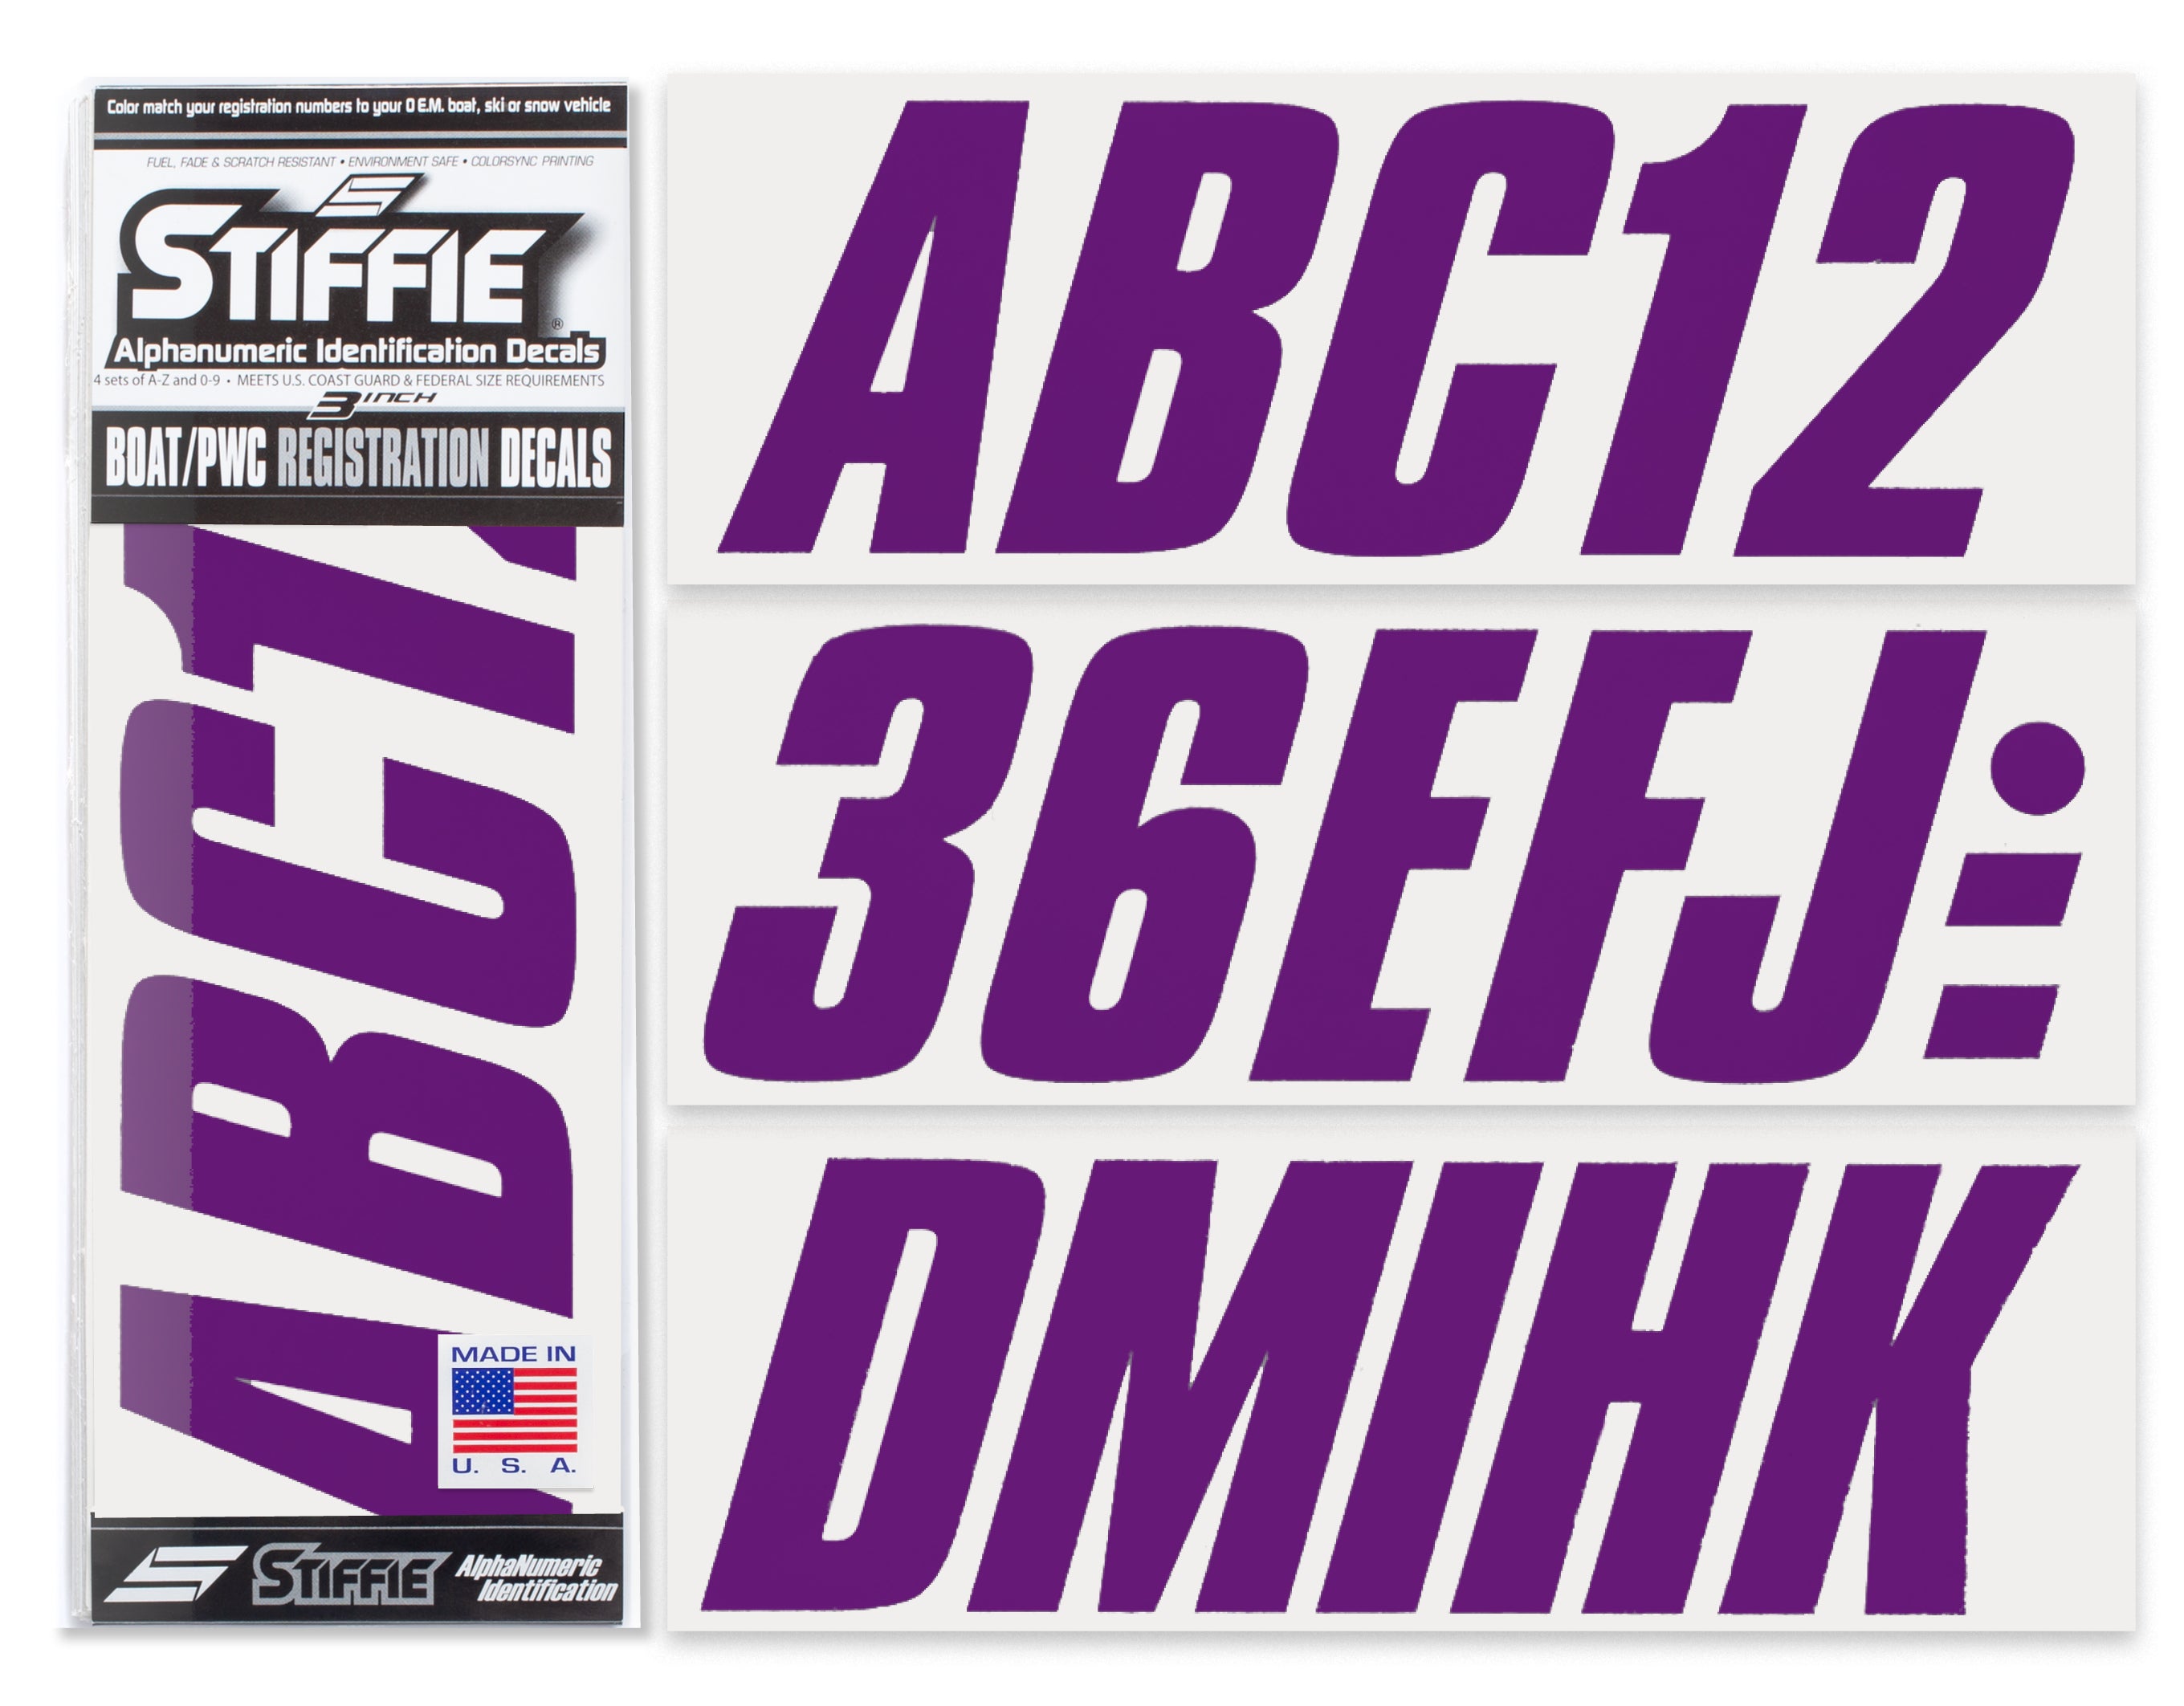 STIFFIE Shift Purple 3" ID Kit Alpha-Numeric Registration Identification Numbers Stickers Decals for Boats & Personal Watercraft